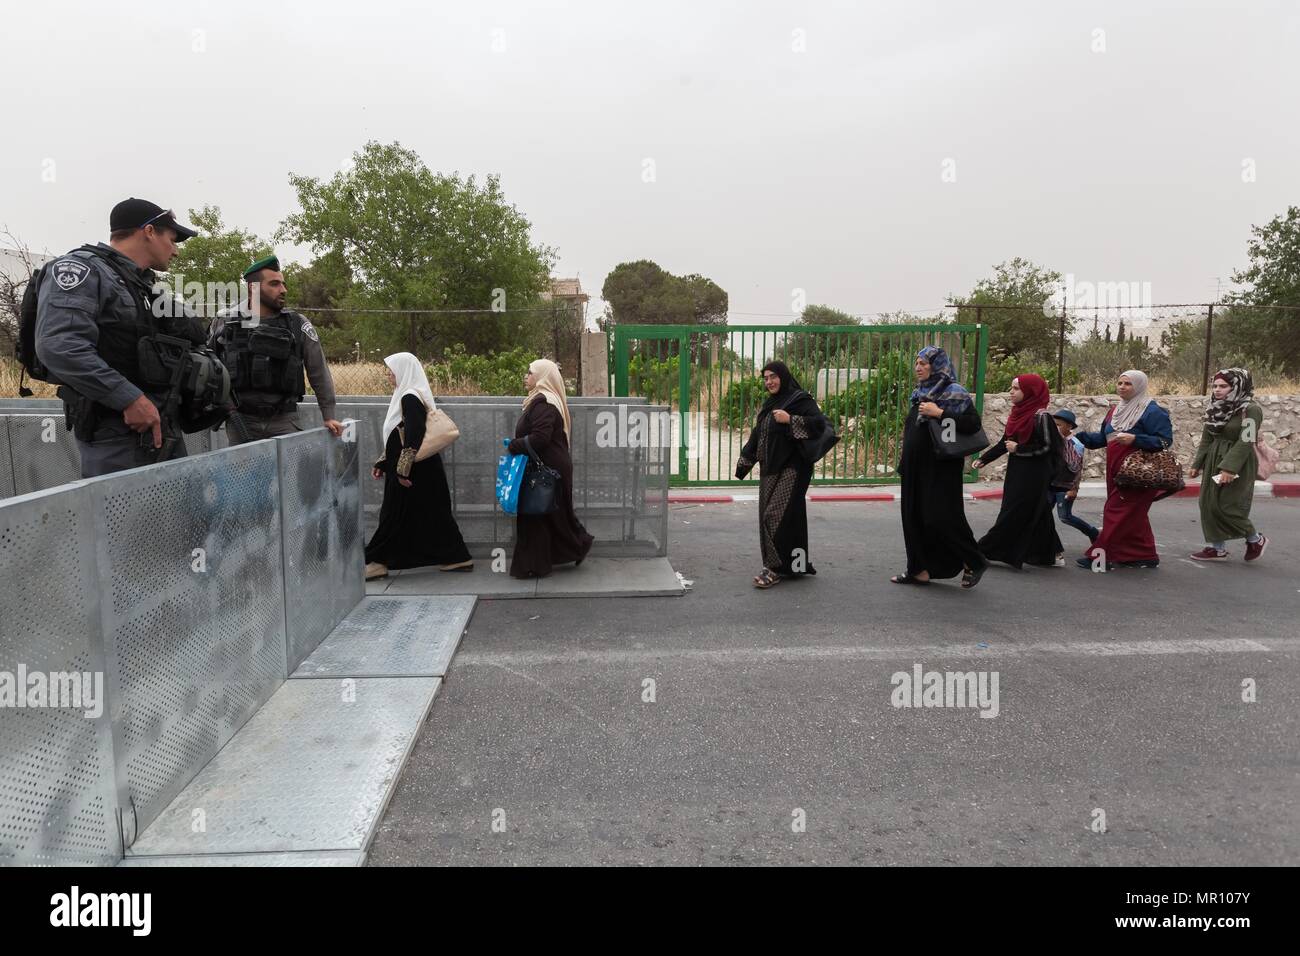 Bethlehem, West bank city of Bethlehem. 25th May, 2018. Palestinian women cross an Israeli checkpoint as they make their way to attend the second Friday prayer of the holy month of Ramadan in Jerusalem's al-Aqsa mosque, in the West bank city of Bethlehem, on May 25, 2018. Credit: Luay Sa baba/Xinhua/Alamy Live News Stock Photo